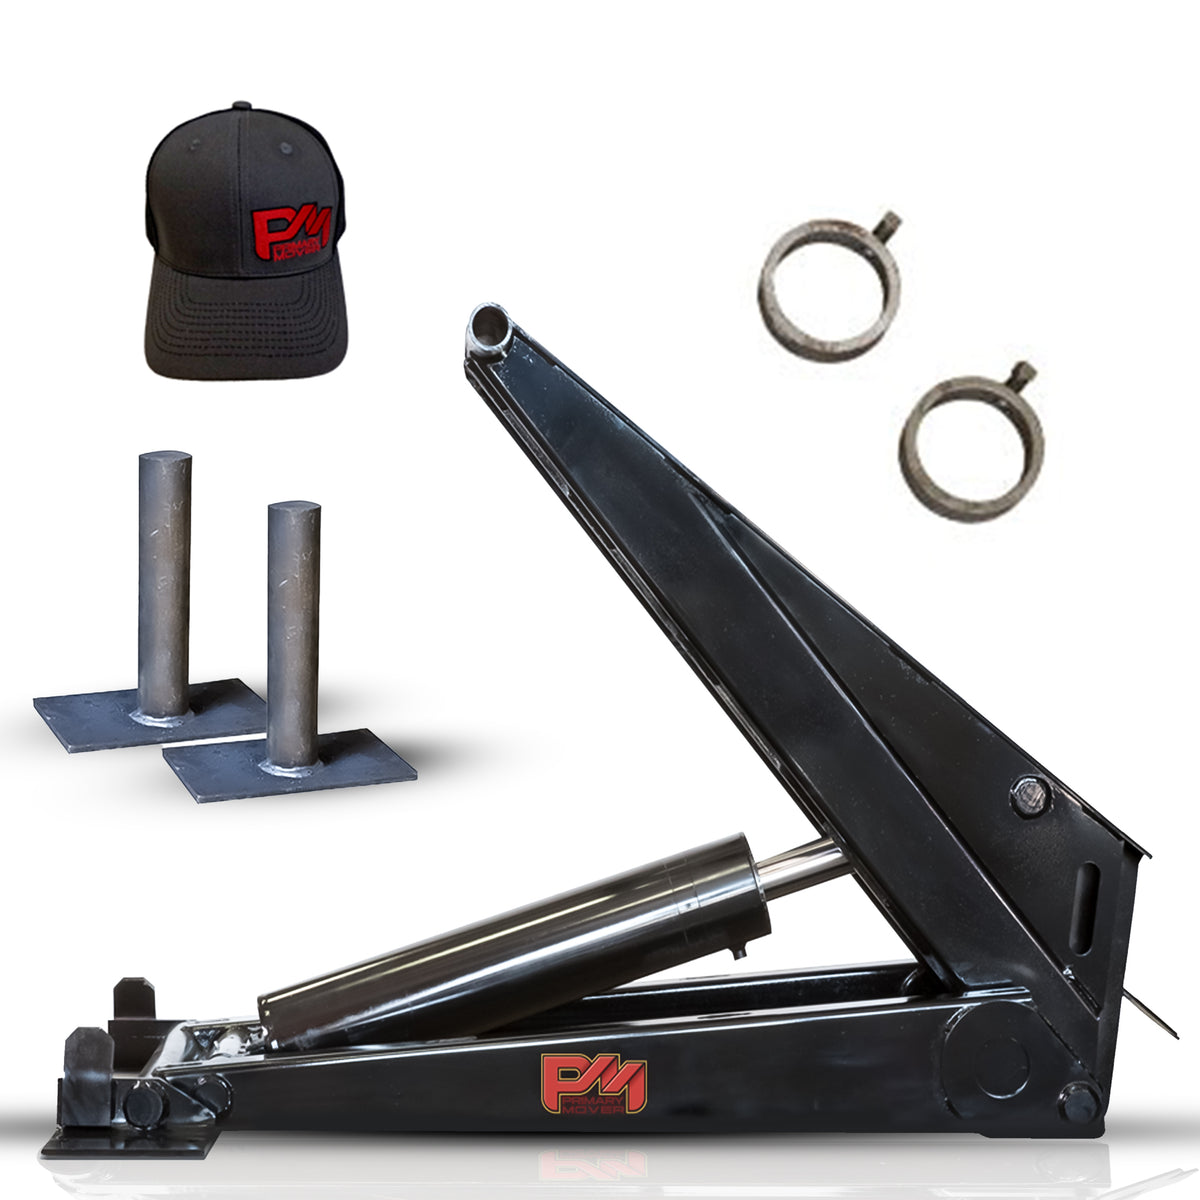 Hydraulic Scissor Hoist Kit - 12 Ton Capacity - Fits 18-24' Dump Body | PF-630: Black car jack with metal tubes, red logo, pair of metal rings, and poles. Includes cylinder, mounting brackets, hydraulic pump, and more.